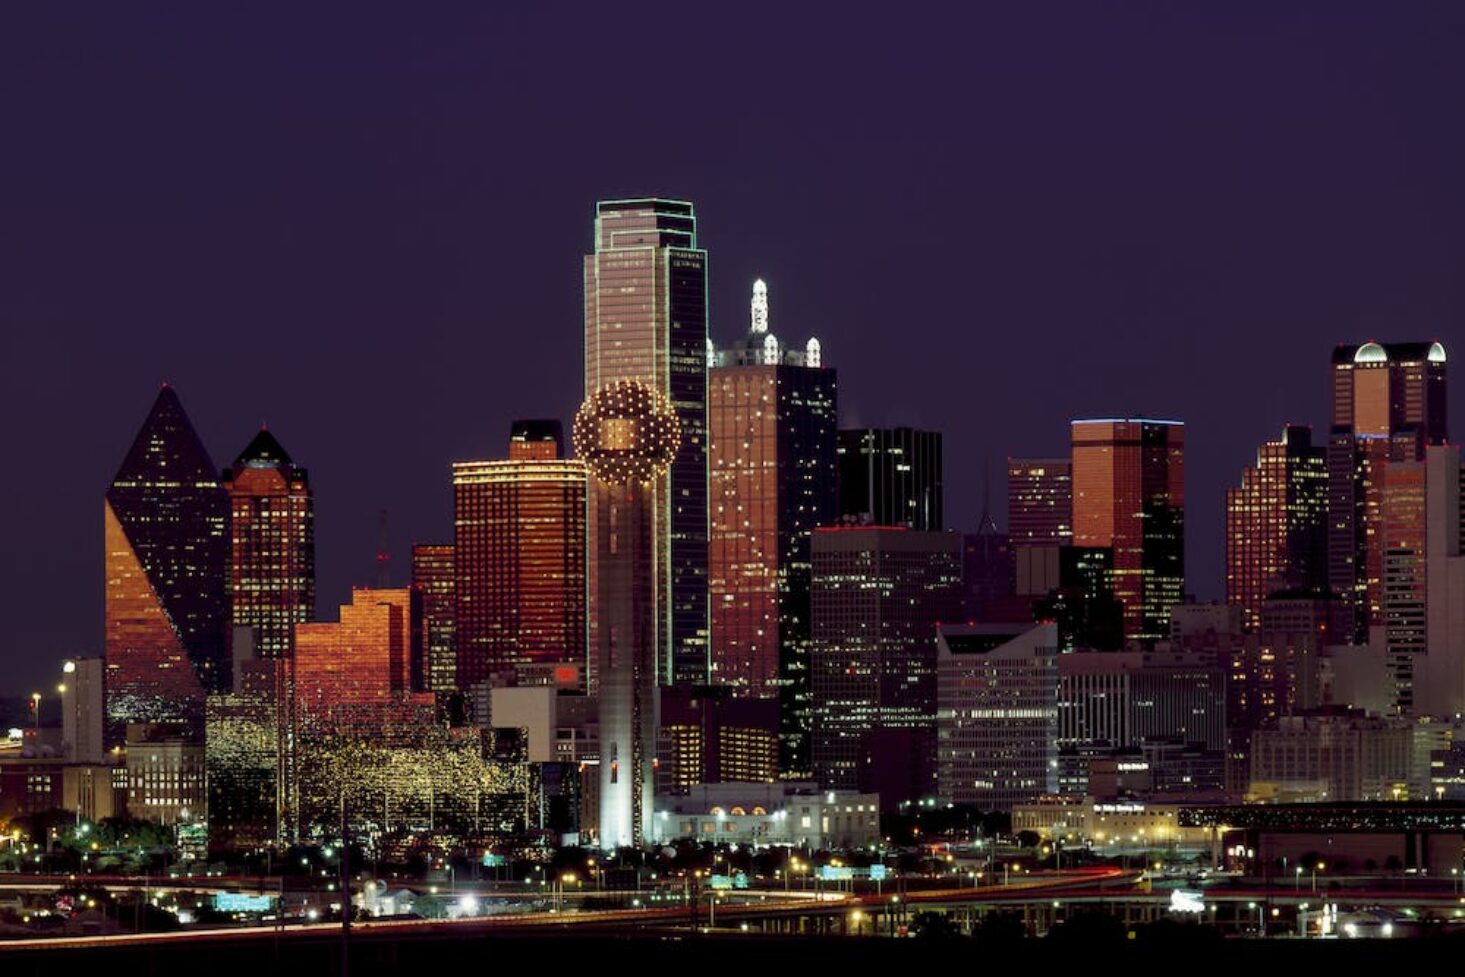 The Most Exciting Festivals and Events in Dallas